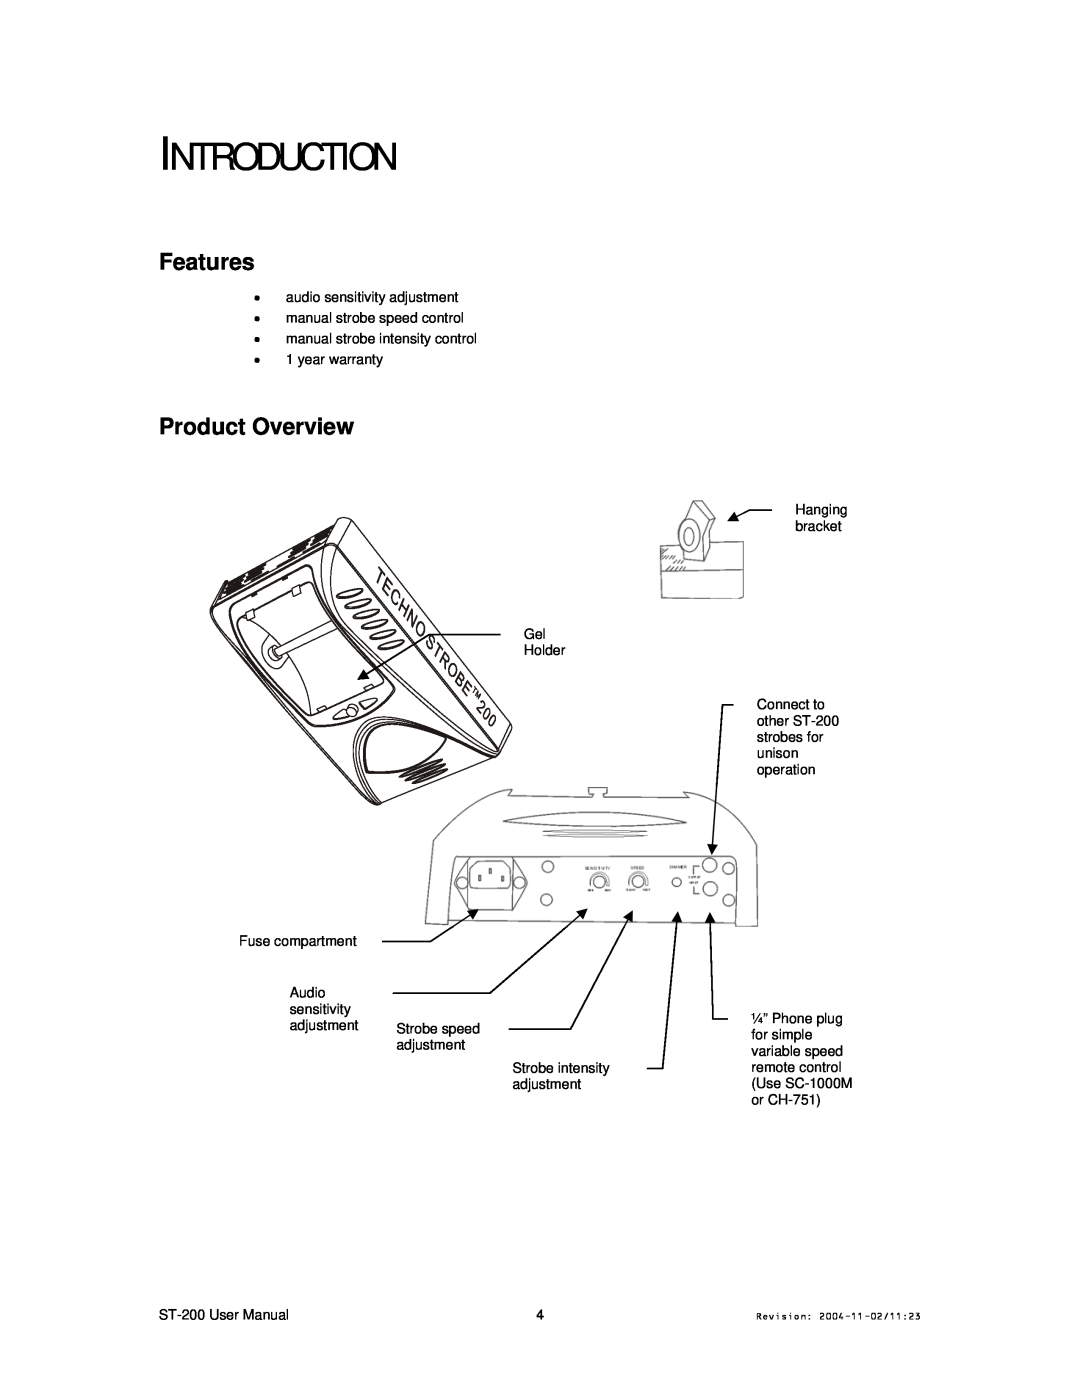 Chauvet Model ST-200 user manual Introduction, Features, Product Overview 